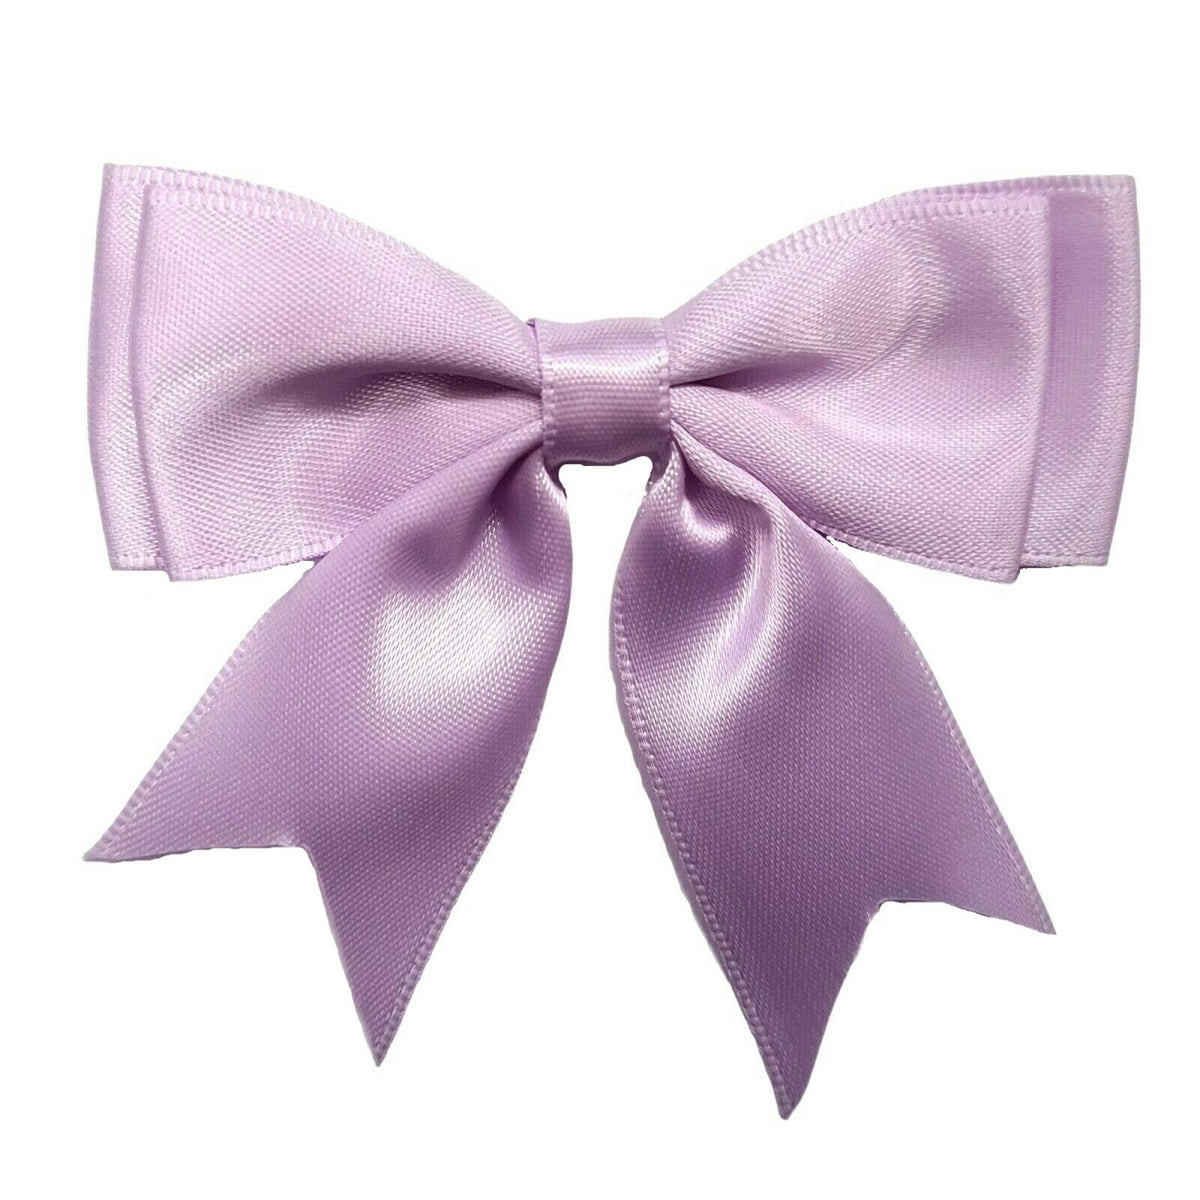 Leyice Double Sided Satin Ribbon 1/4 Inch 100 Yards Fabric Ribbon for Bows  Crafts Gift Wrapping Crafts (Purple)